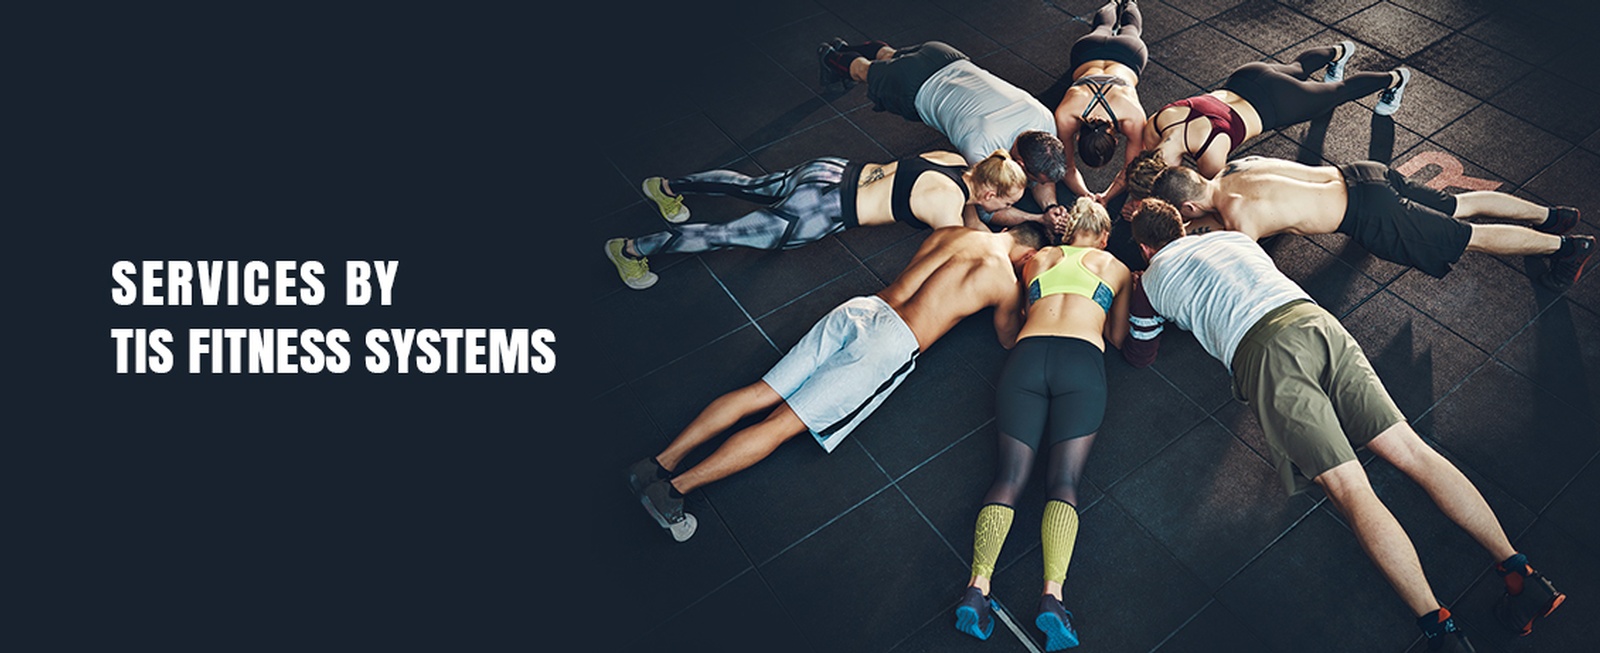 Personal Training Services by TIS Fitness Systems